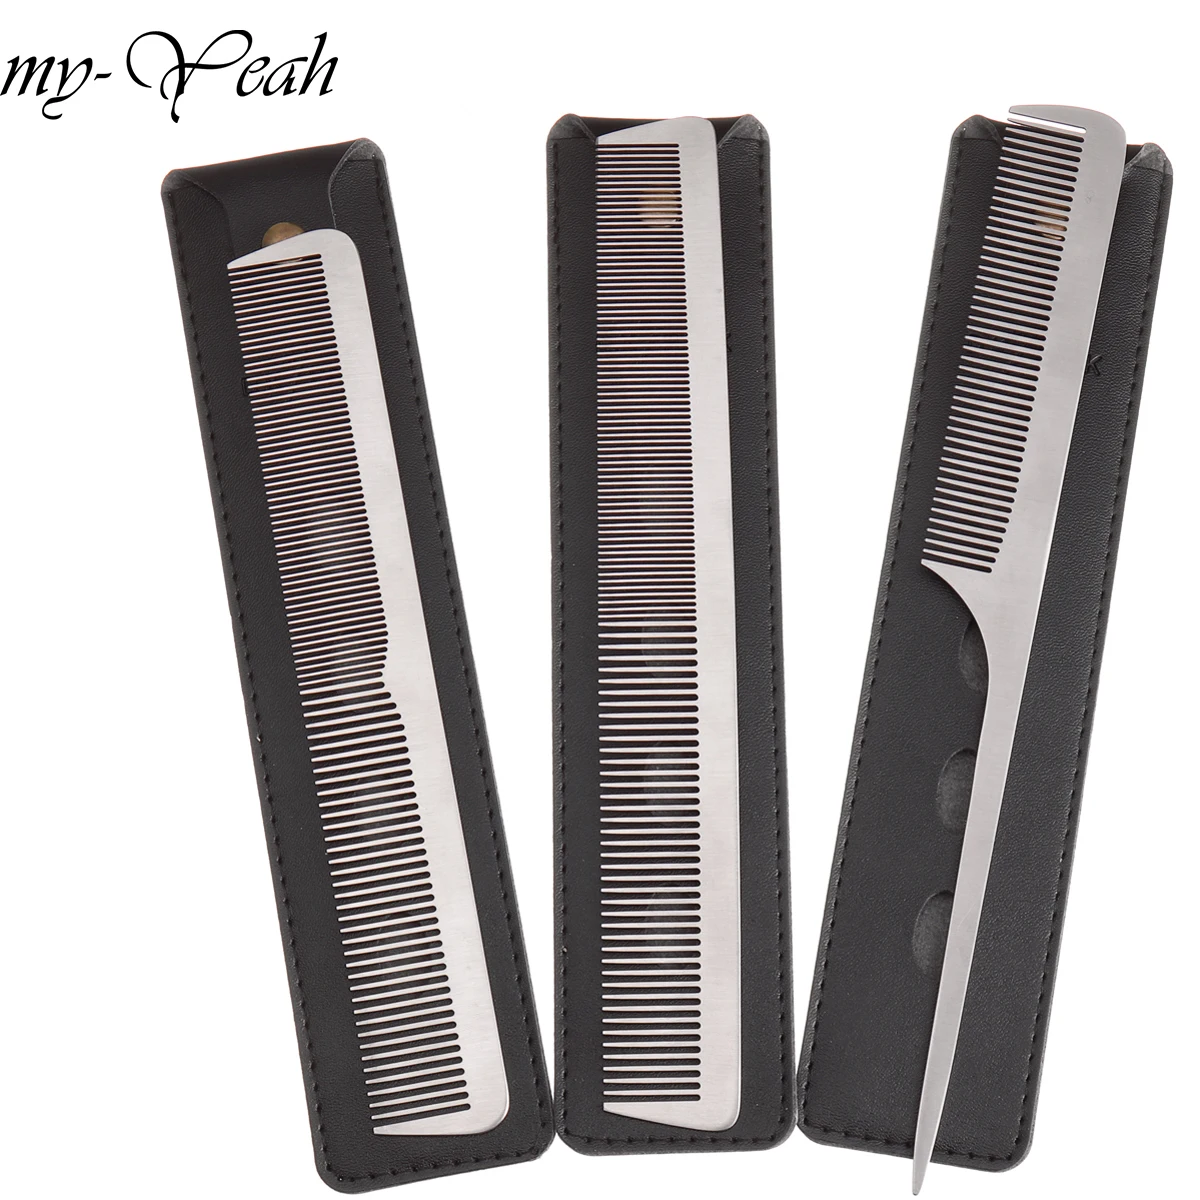 

3 Style Metal Hair Comb Detangling Hairstyling Straightening Section Comb Barber Haircutting Combs With Leather Case